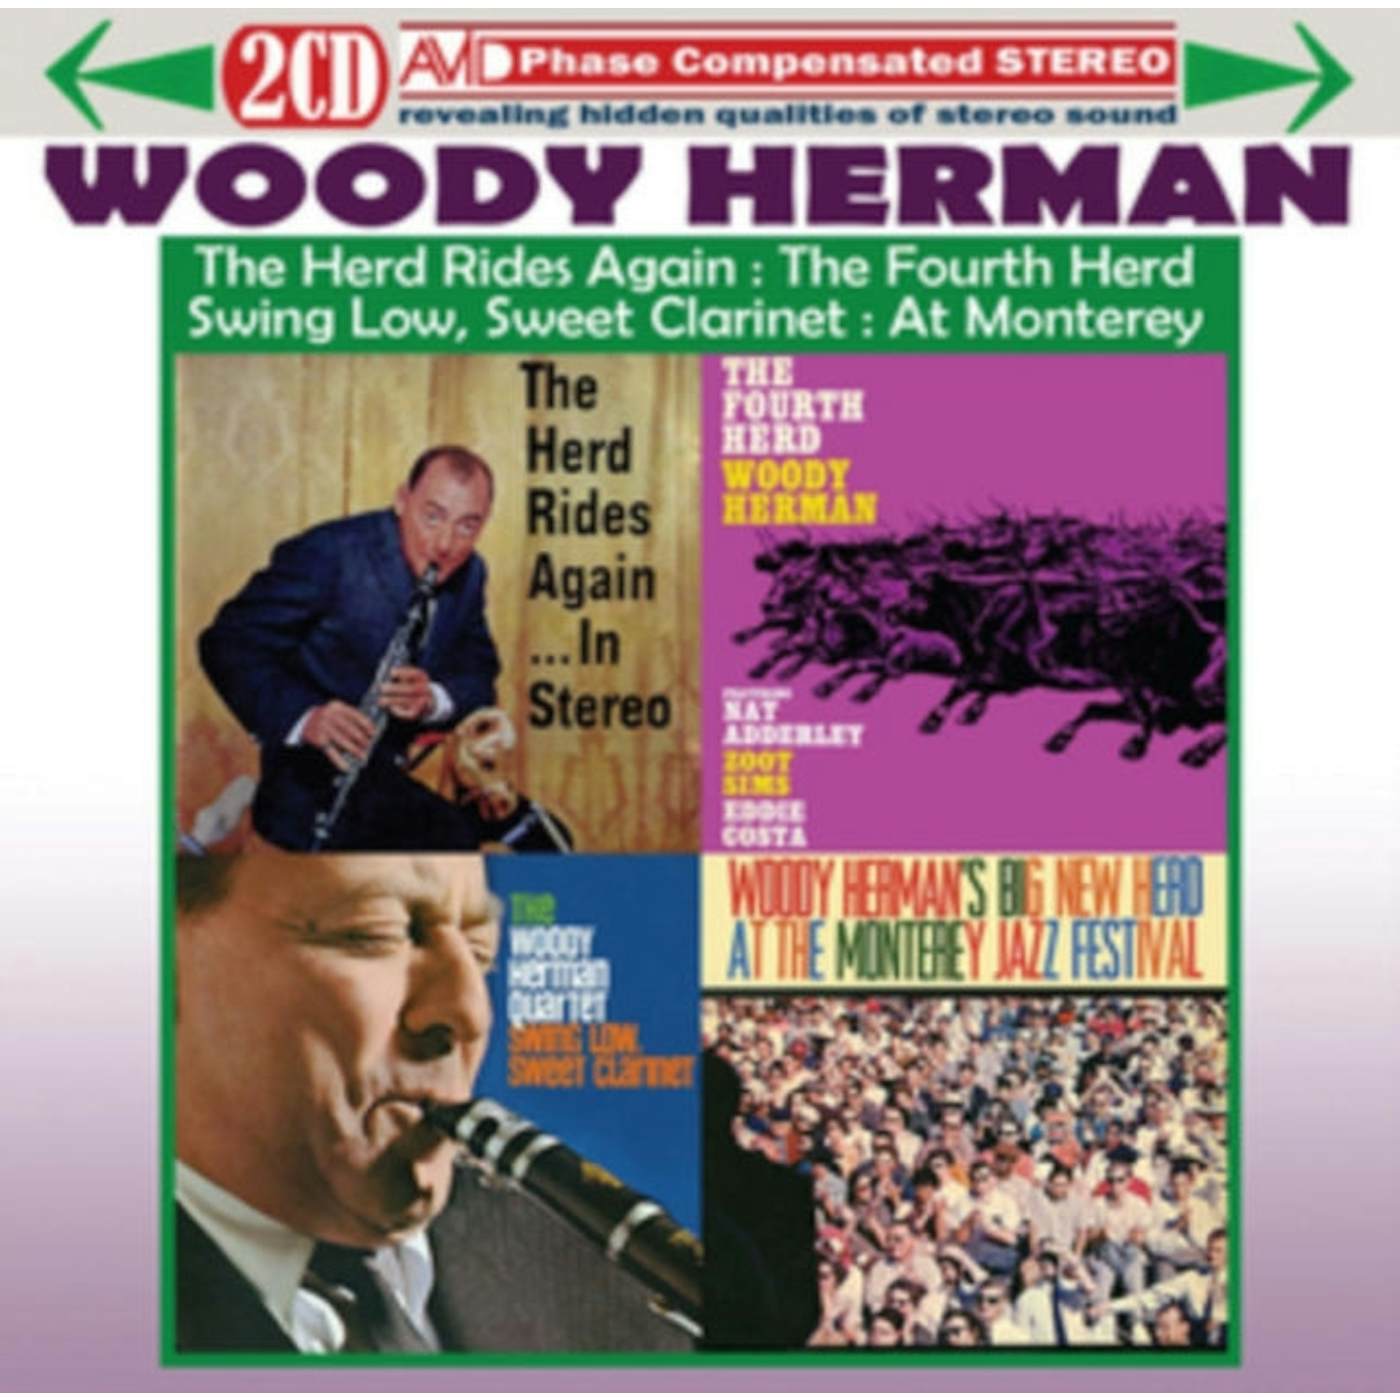 Woody Herman CD - Four Classic Albums